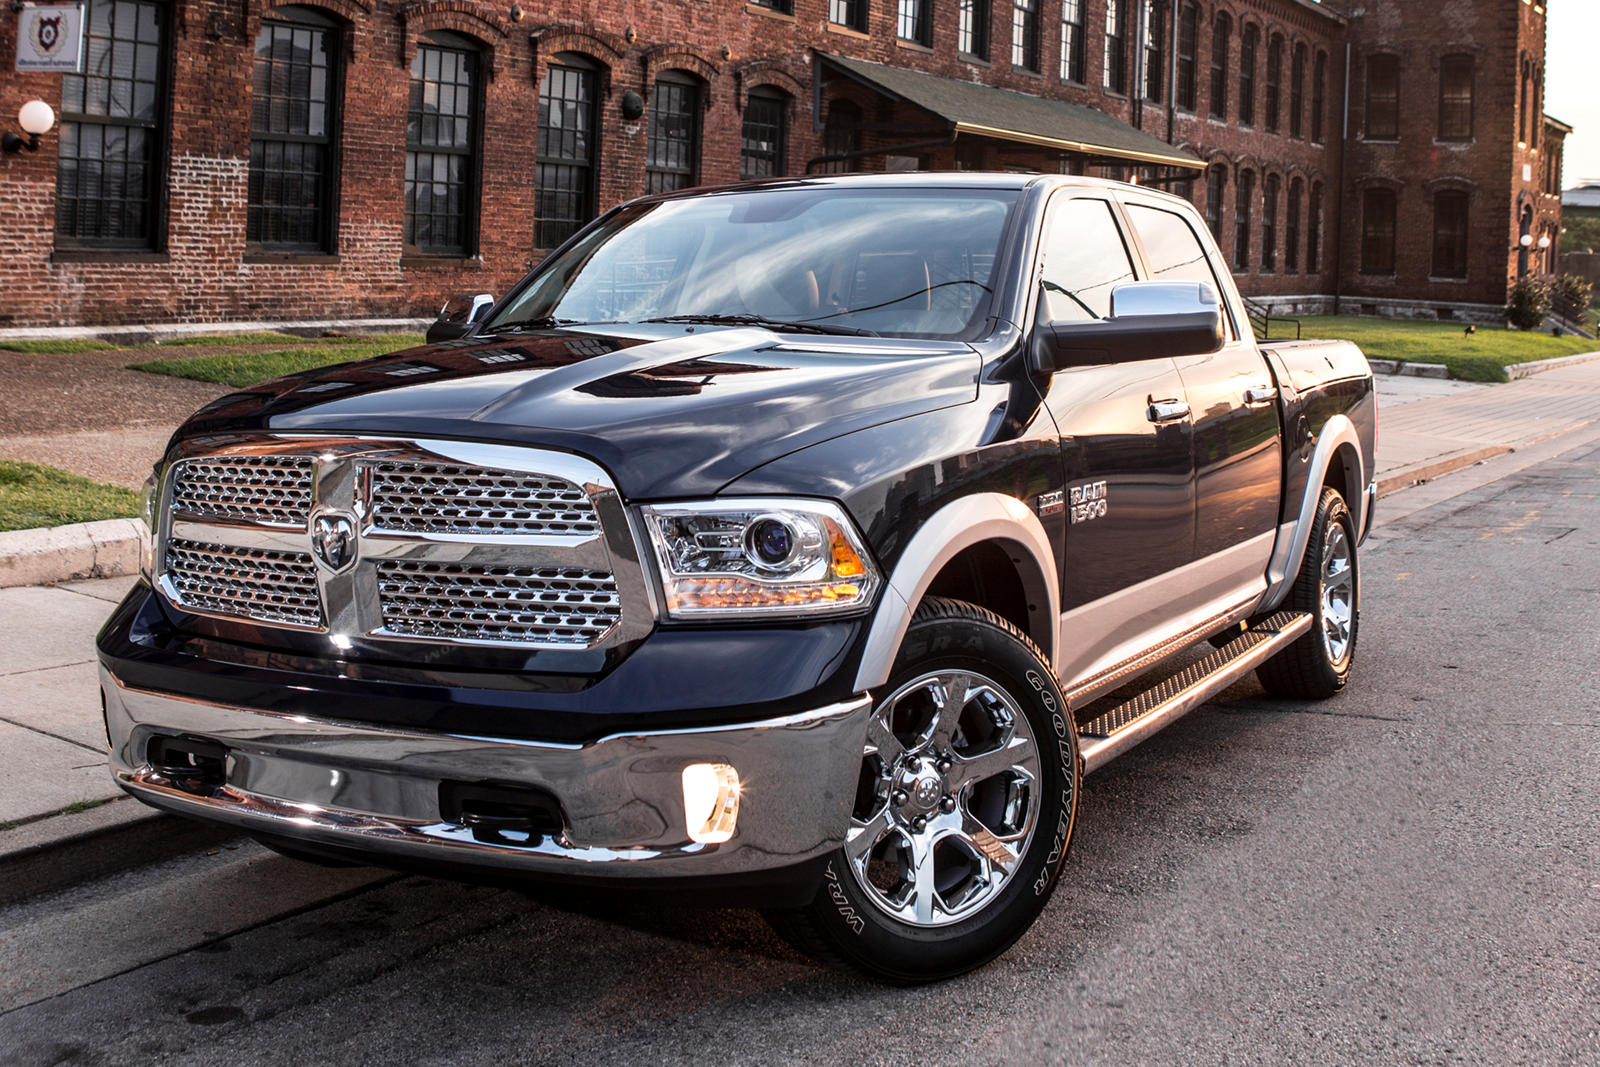 Used 2012 Ram 1500 in Fort Worth, TX For Sale.